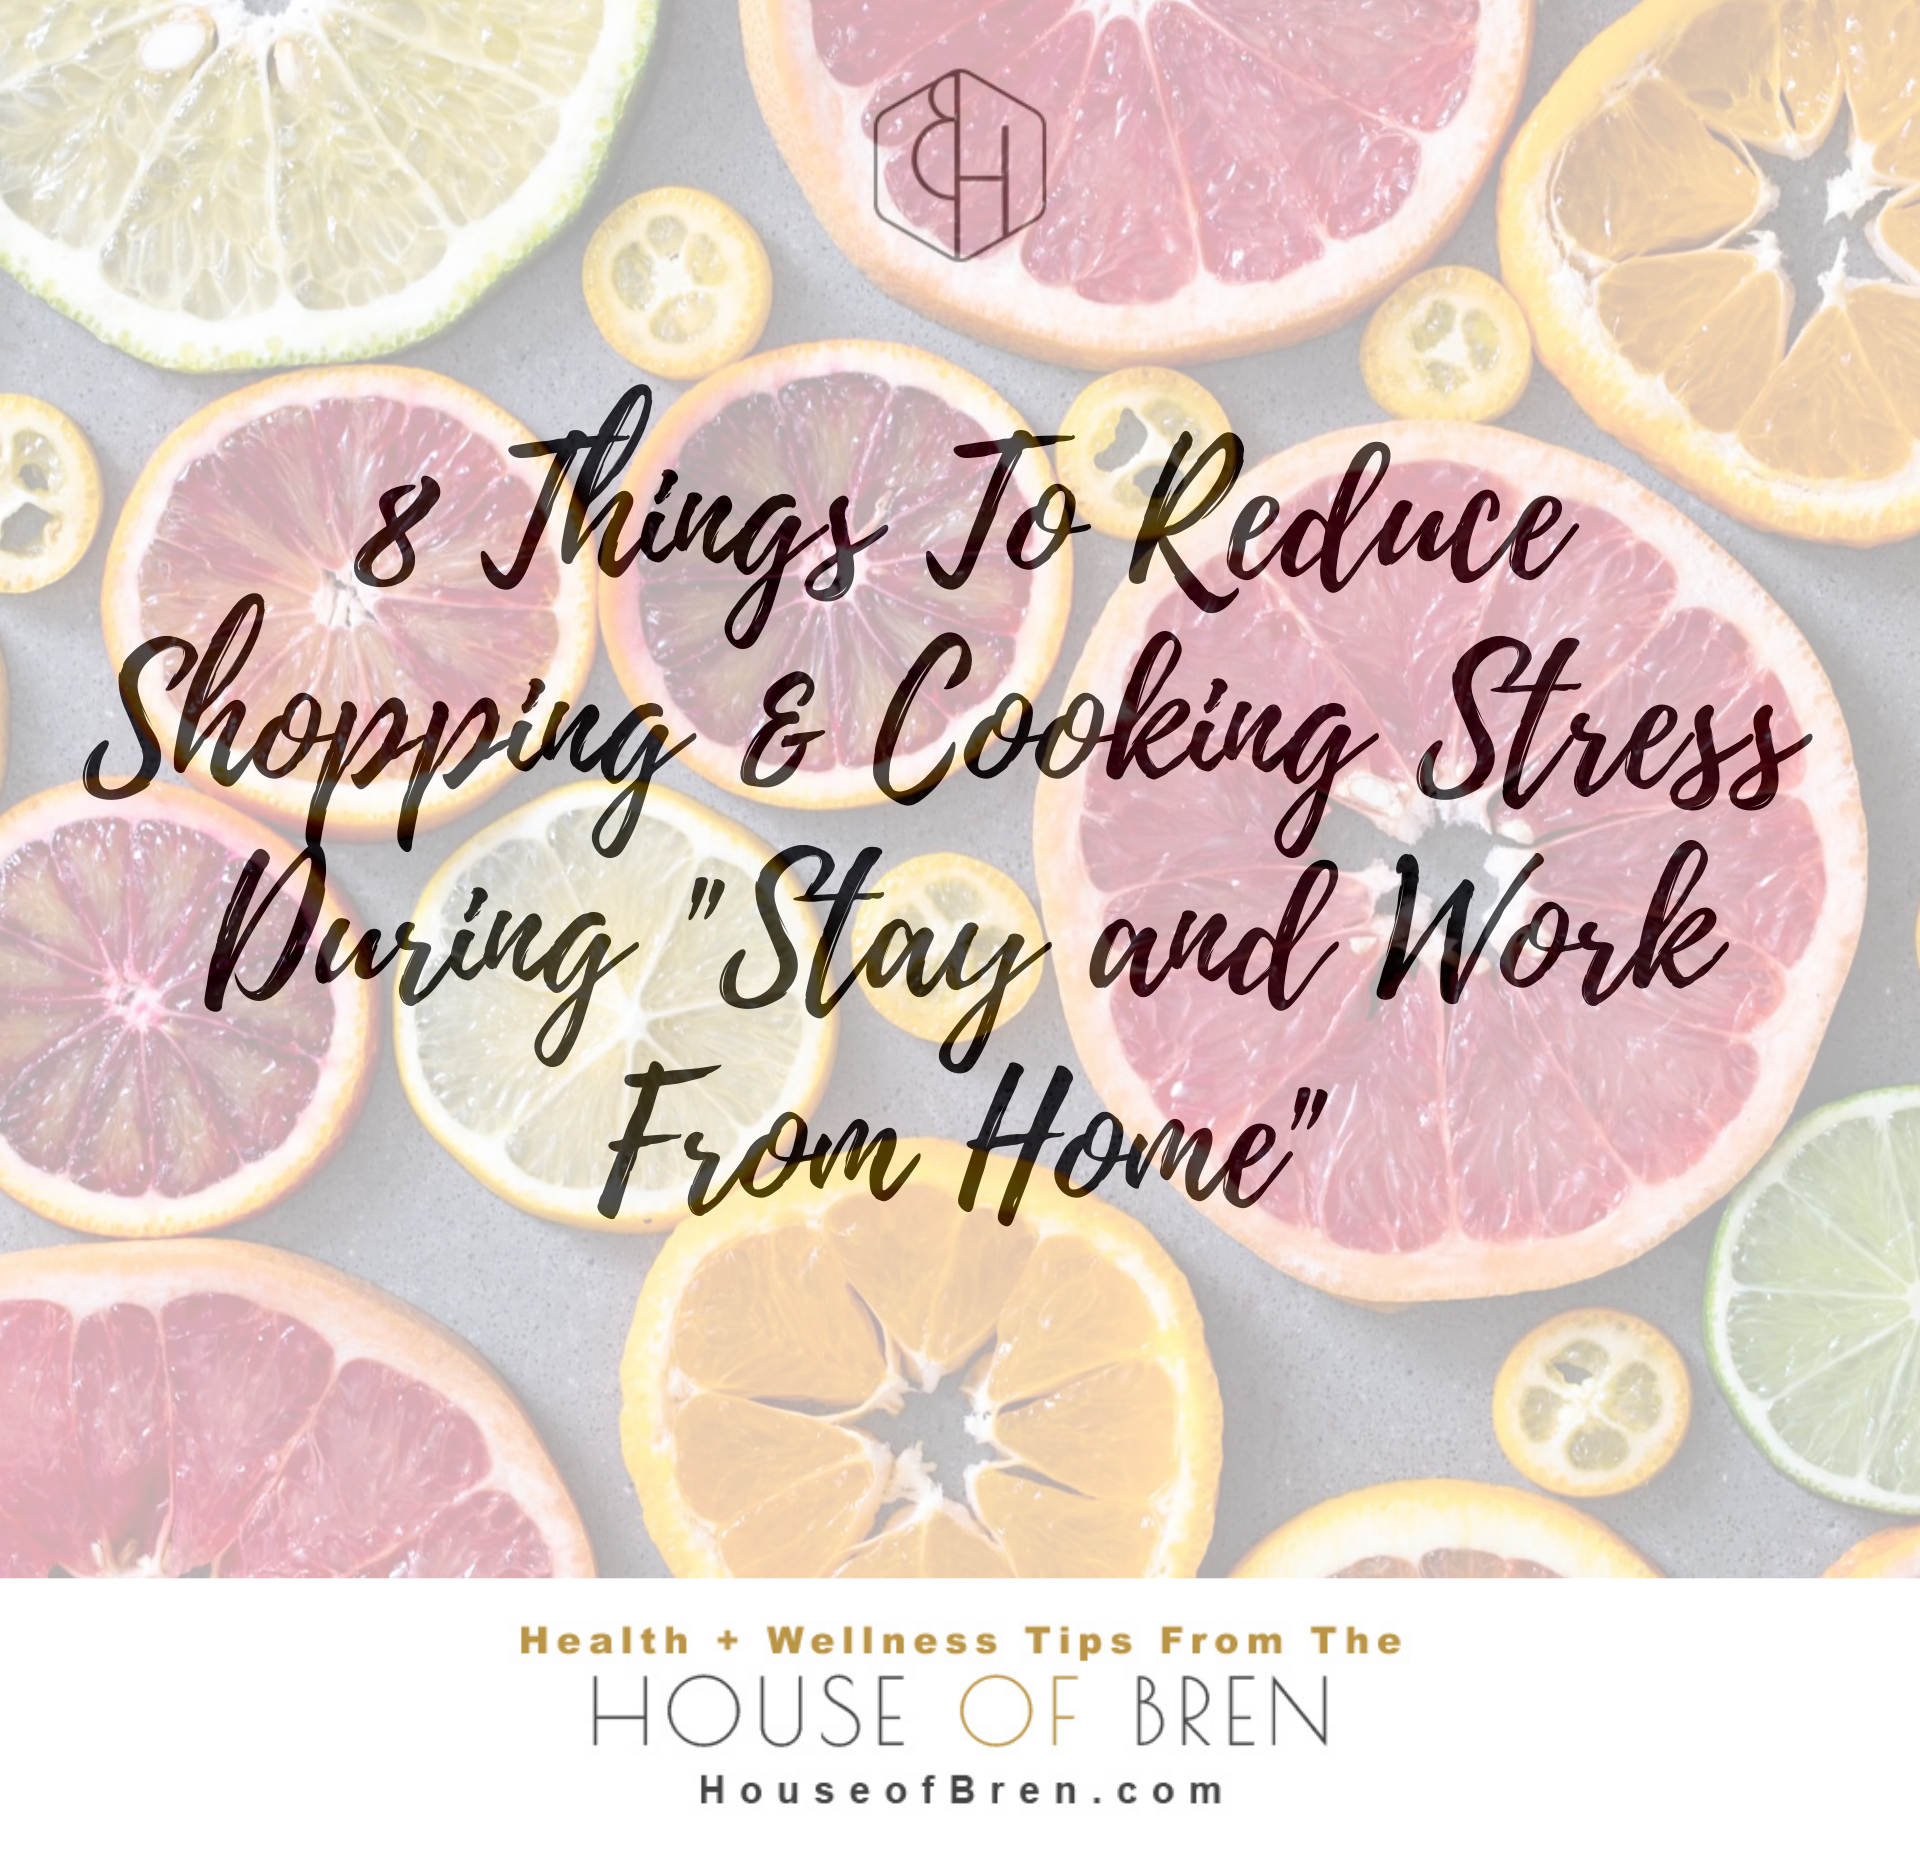 https://houseofbren.com/wp-content/uploads/2020/03/HOB-IG-8-ways-to-reduce-cooking-stress-during-WFH.png